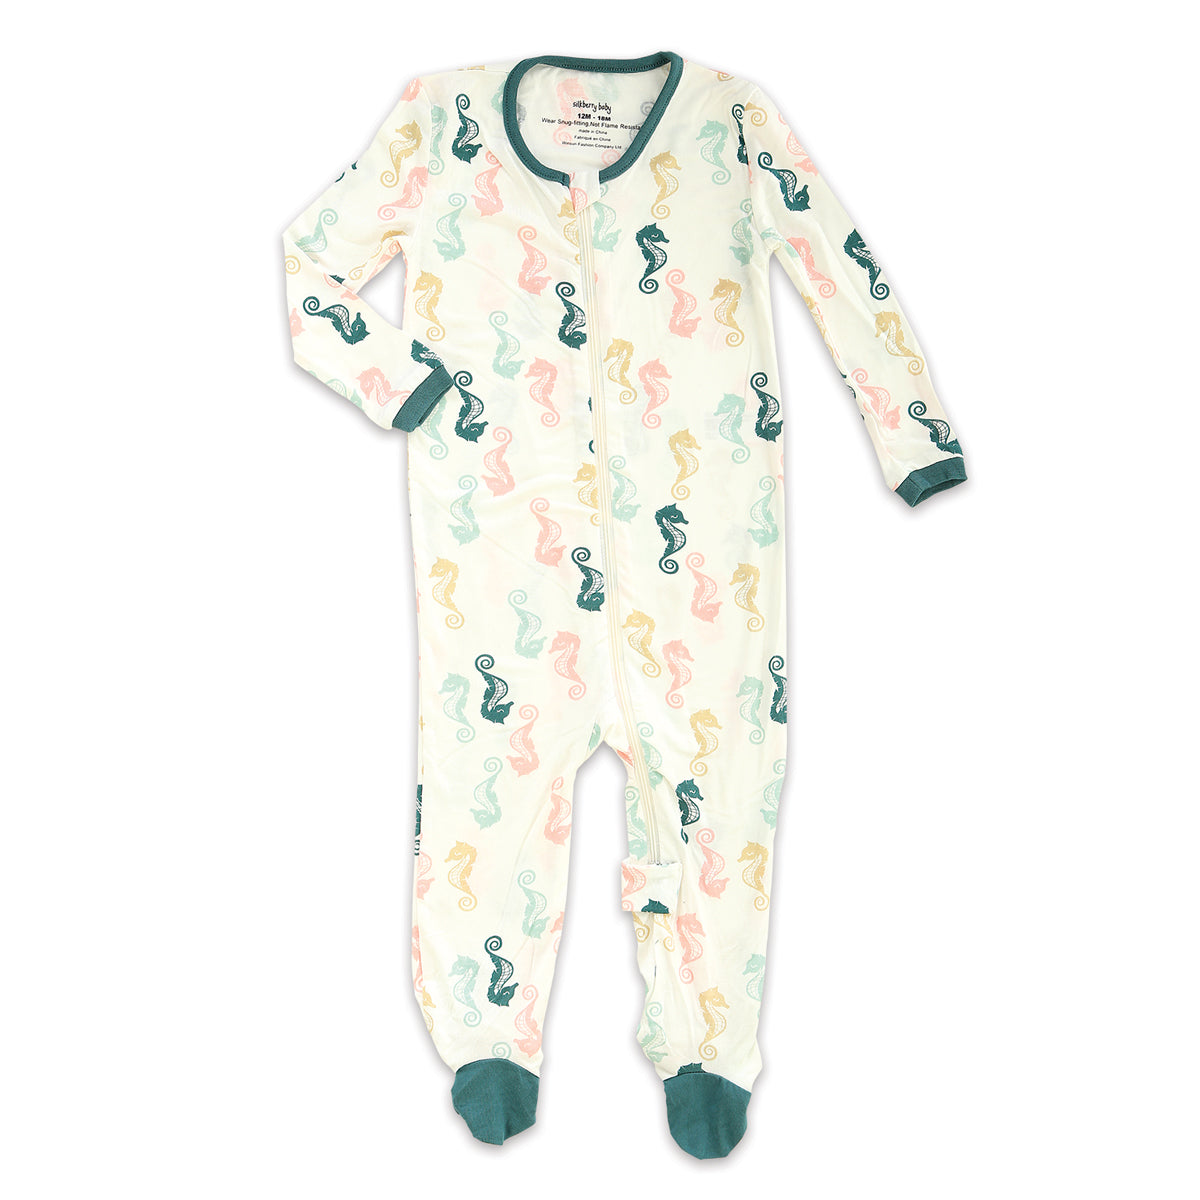 Bamboo Footies with Easy Dressing Zipper (Seahorse Print)